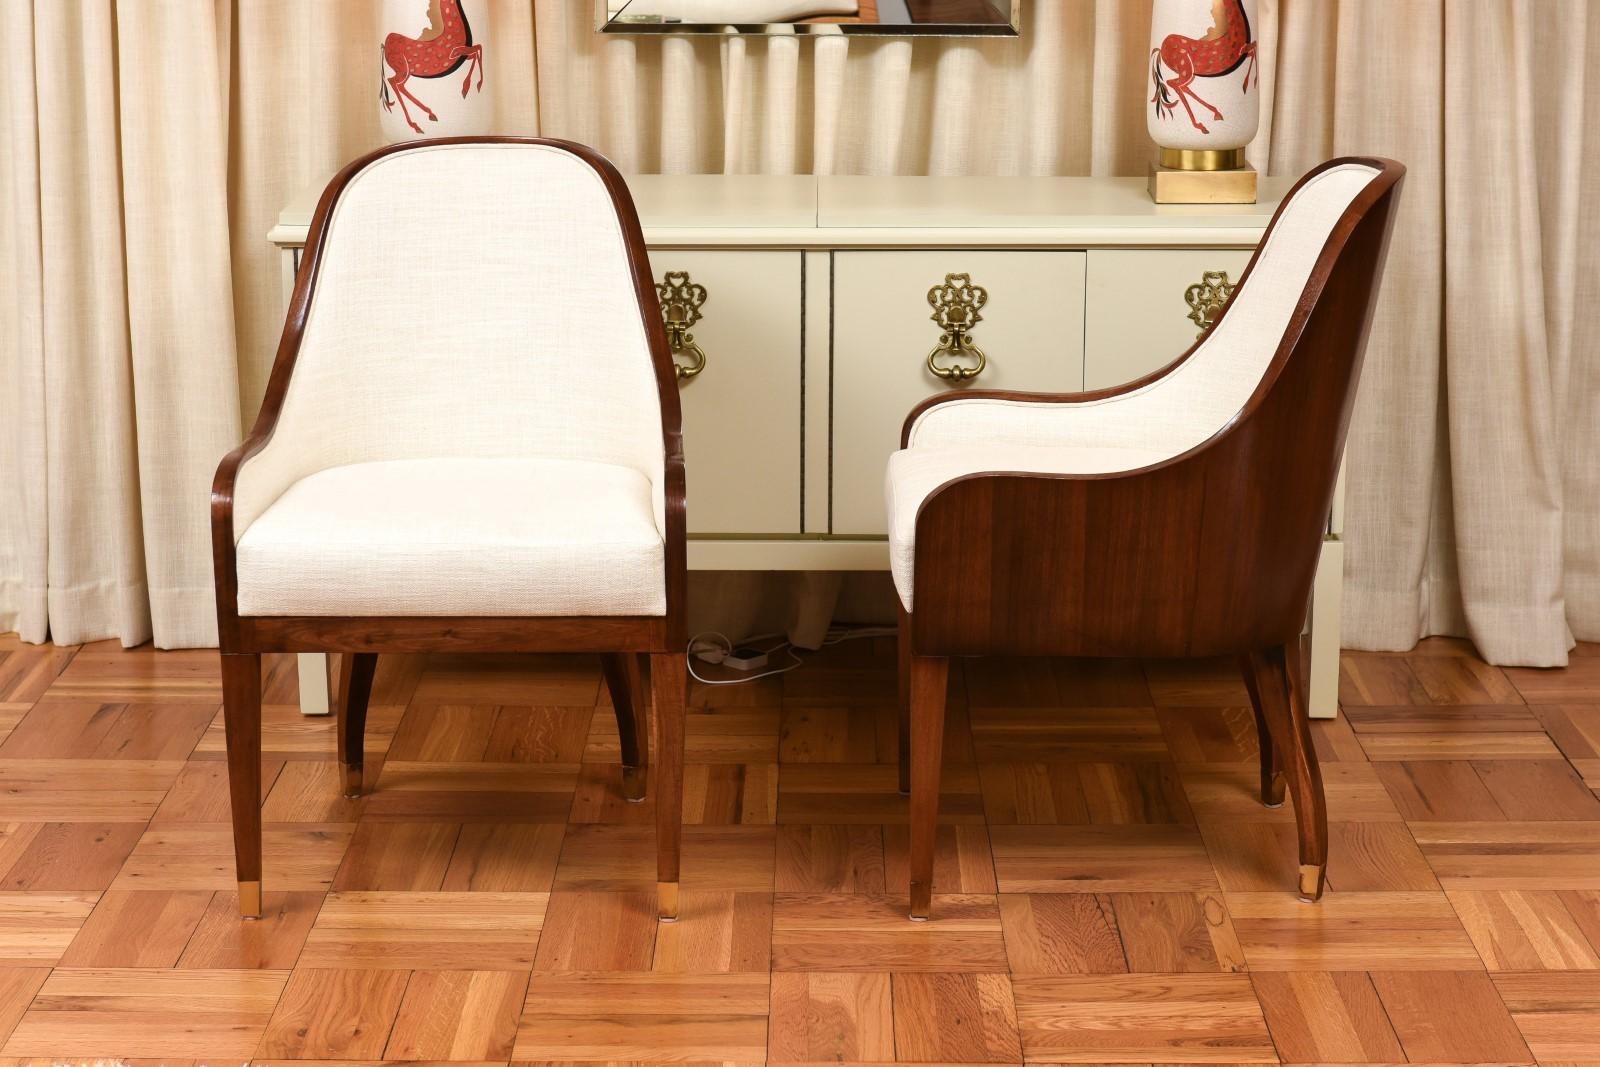 Spectacular Set of 10 Art Deco Revival Chairs in Bookmatch Figured Walnut For Sale 8